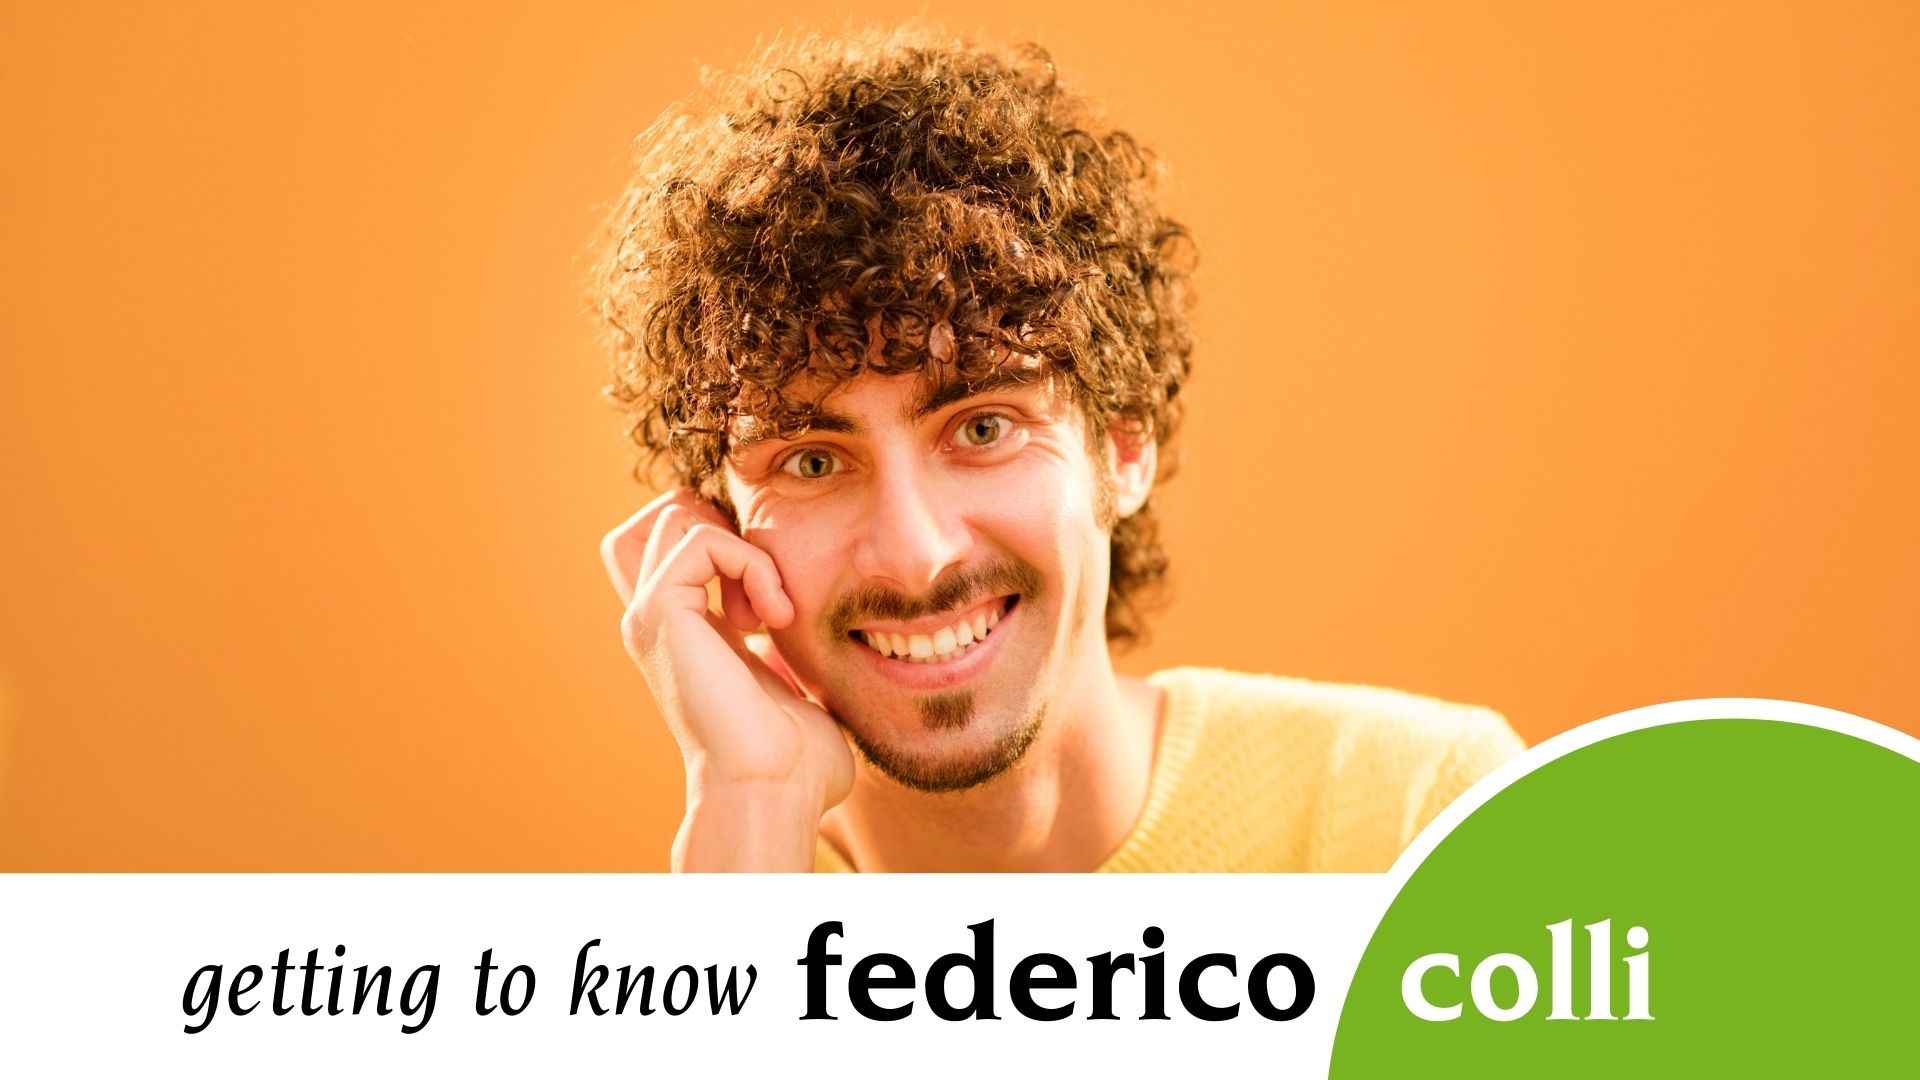 Federico Colli smiling to the camera - get to know him